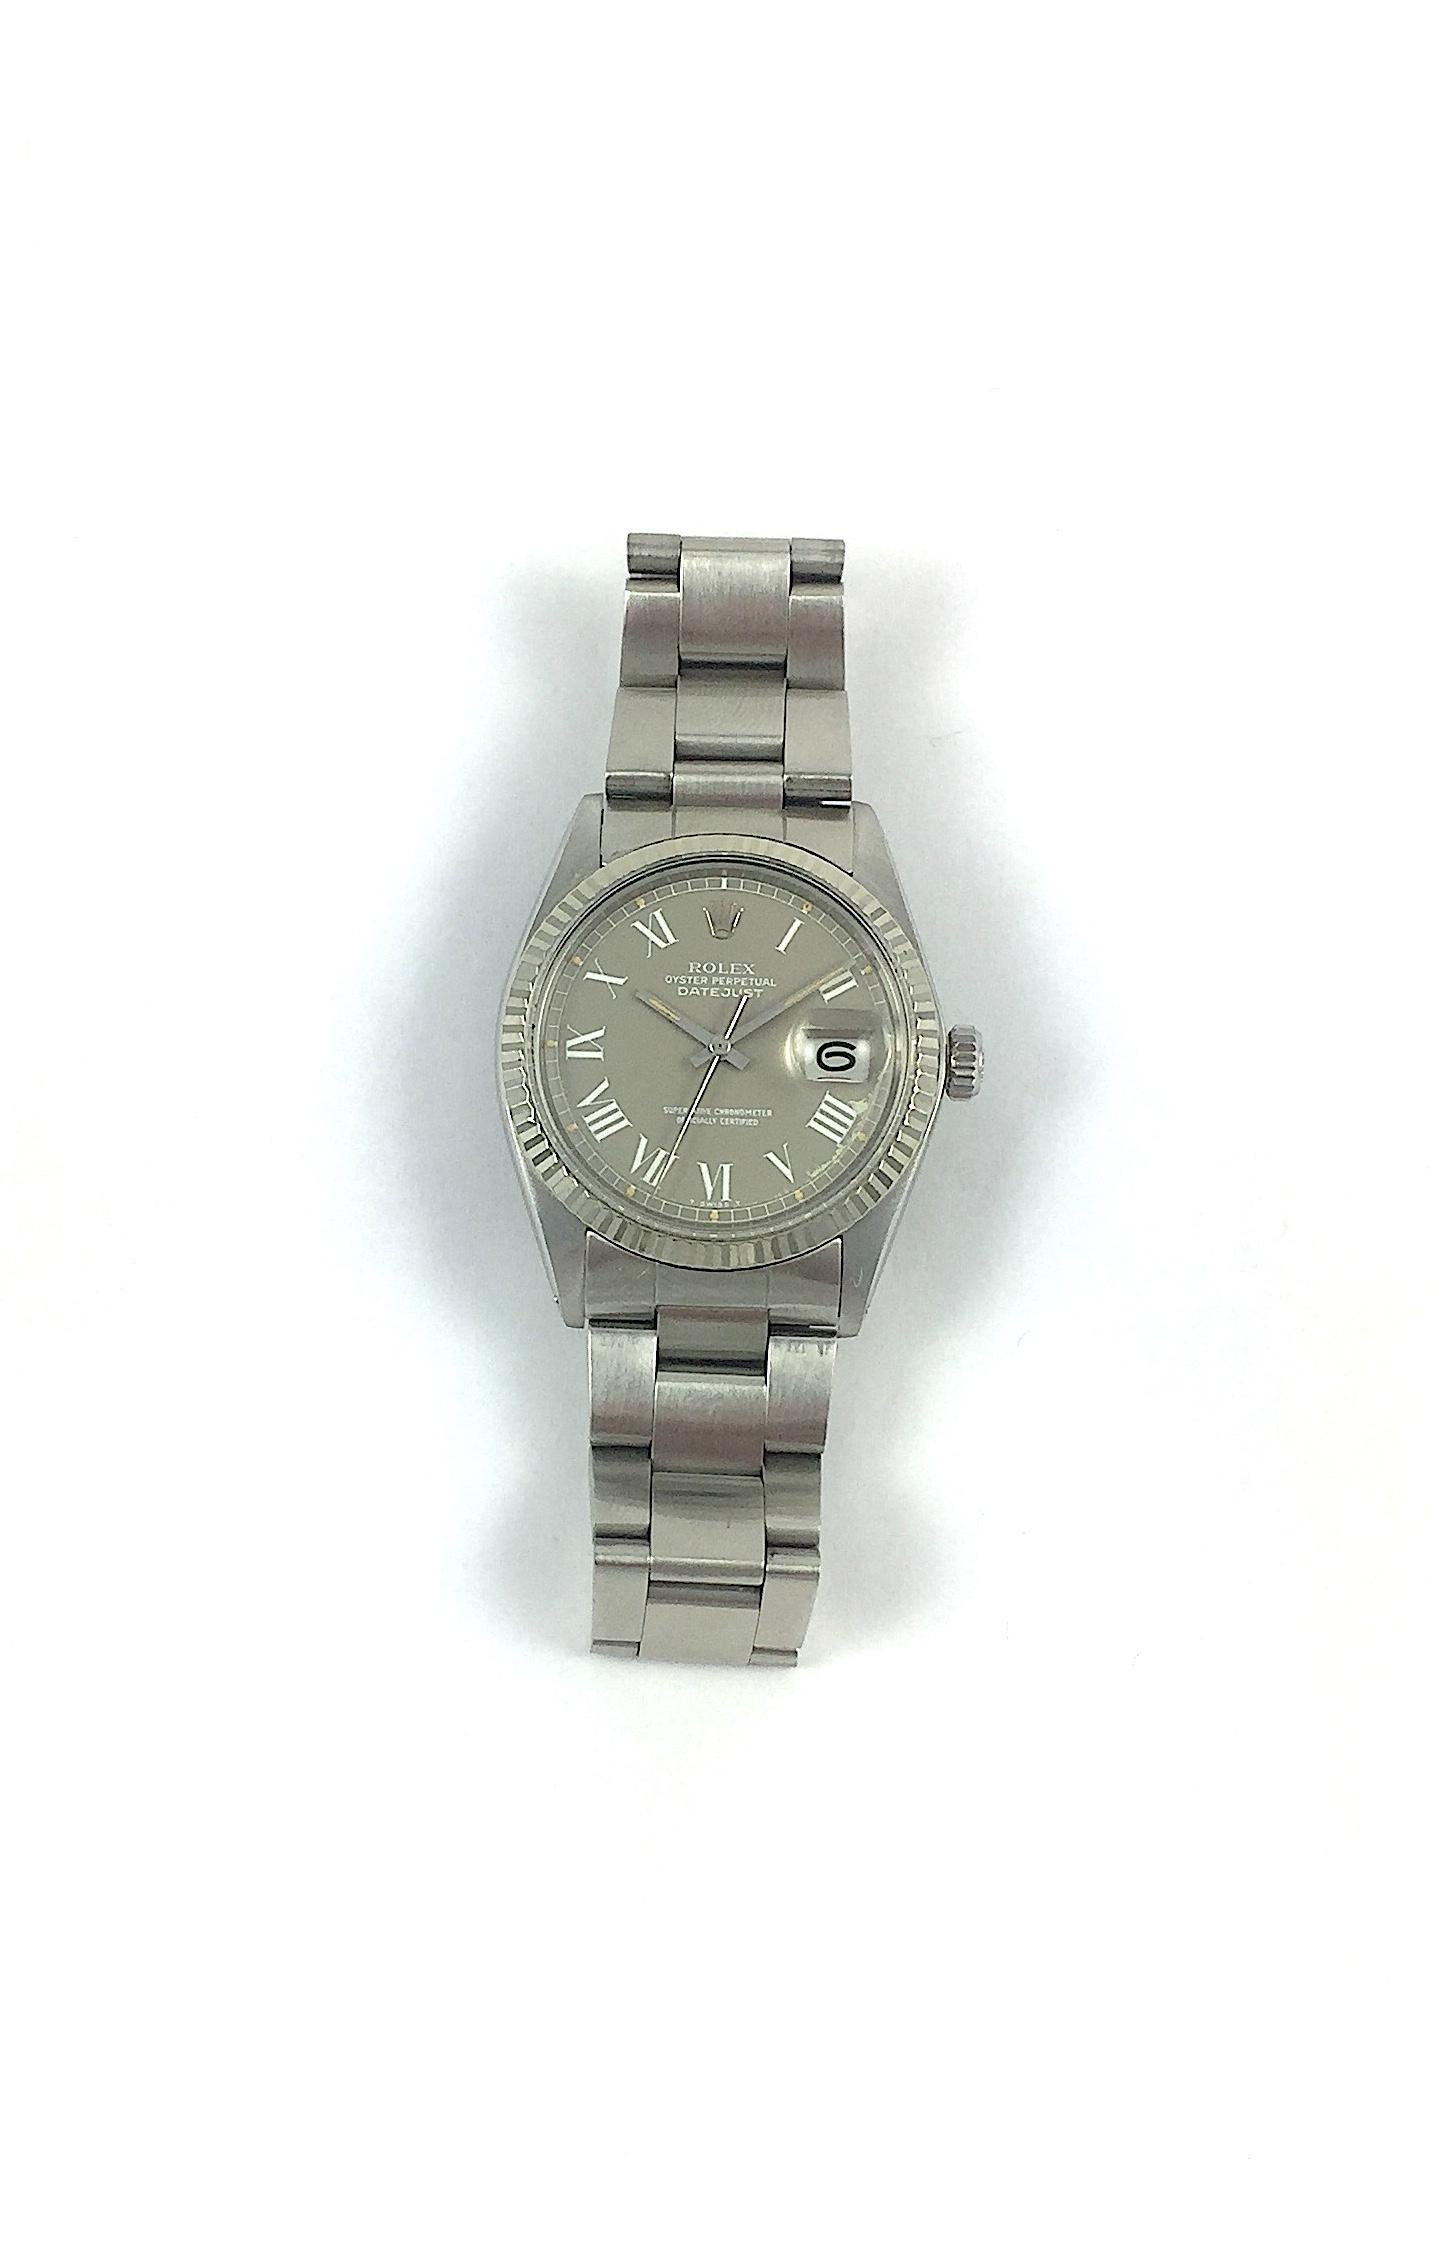 Rolex Stainless Steel and White Gold Oyster Perpetual Datejust Watch
Factory Rare Grey Buckley Dial with White Roman Numeral Hour Markers
Some Wear and Color Loss From Age on Dial
White Gold Fluted Bezel
Stainless Steel Case
36mm in size 
Features